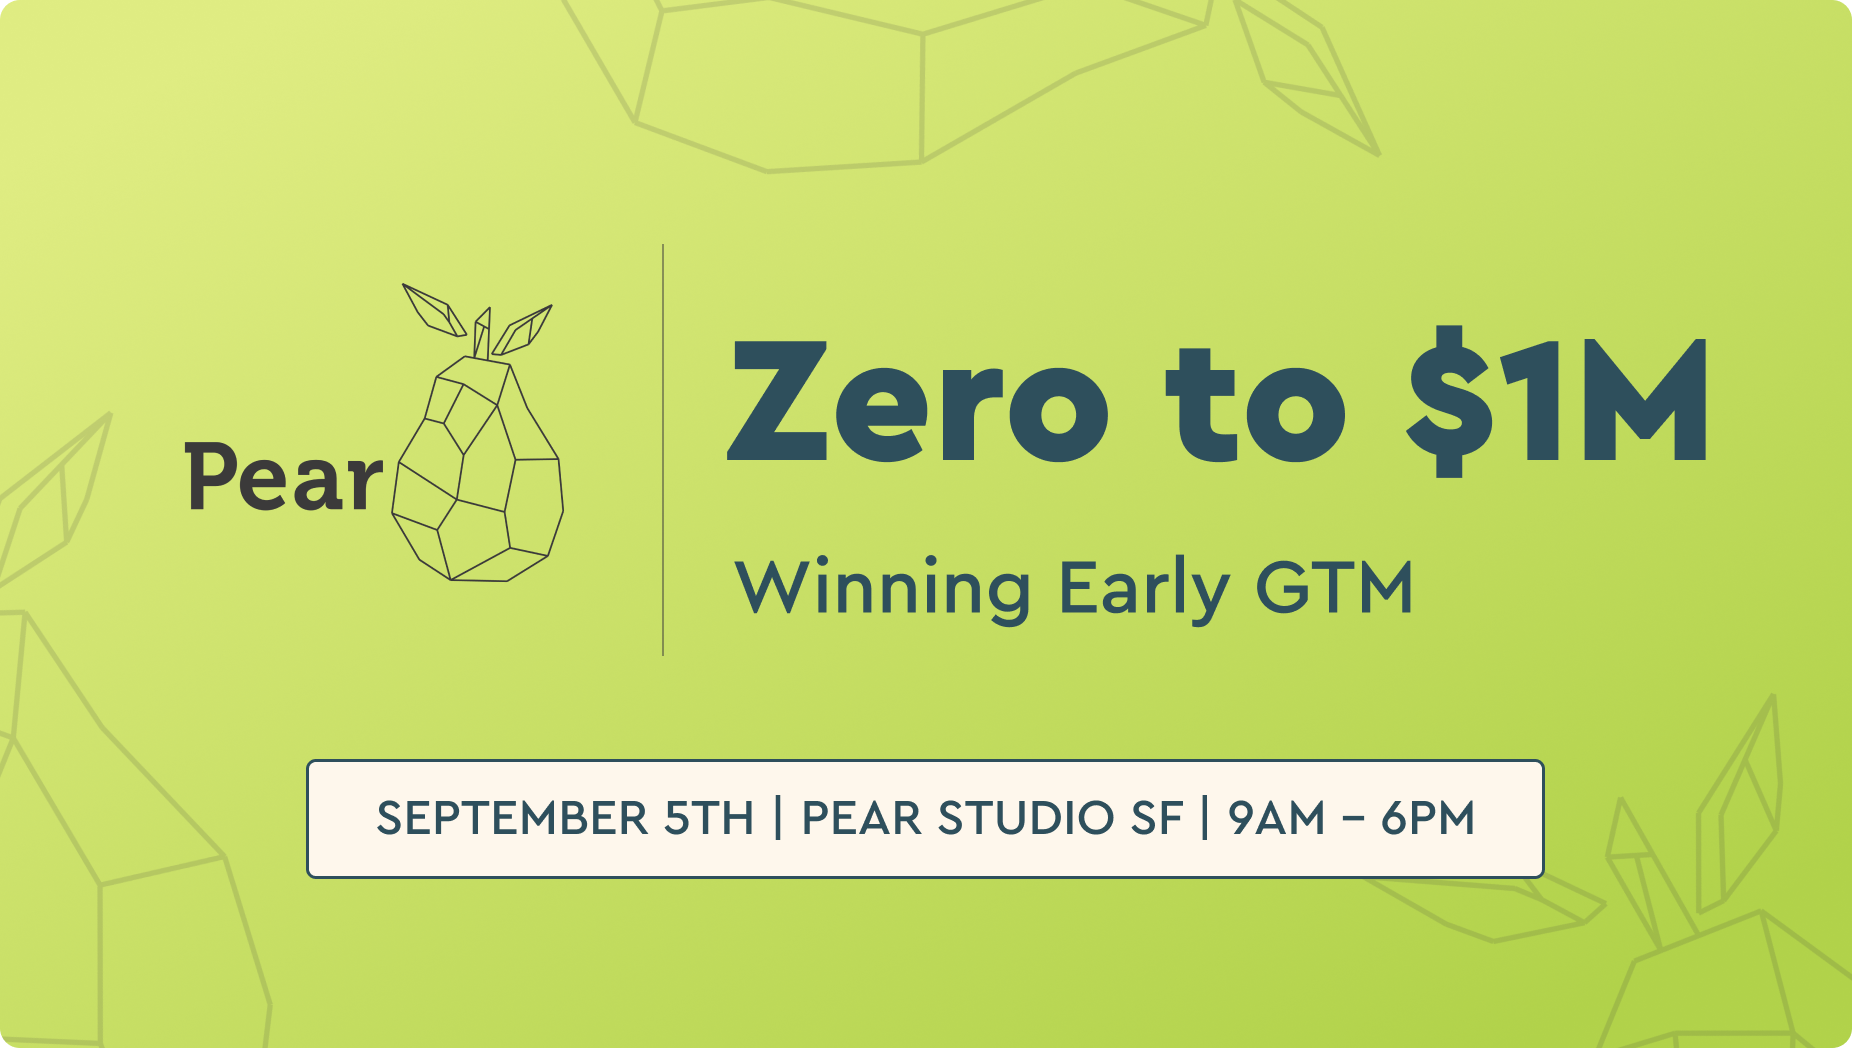 resources Zero to $1M: Winning Early GTM